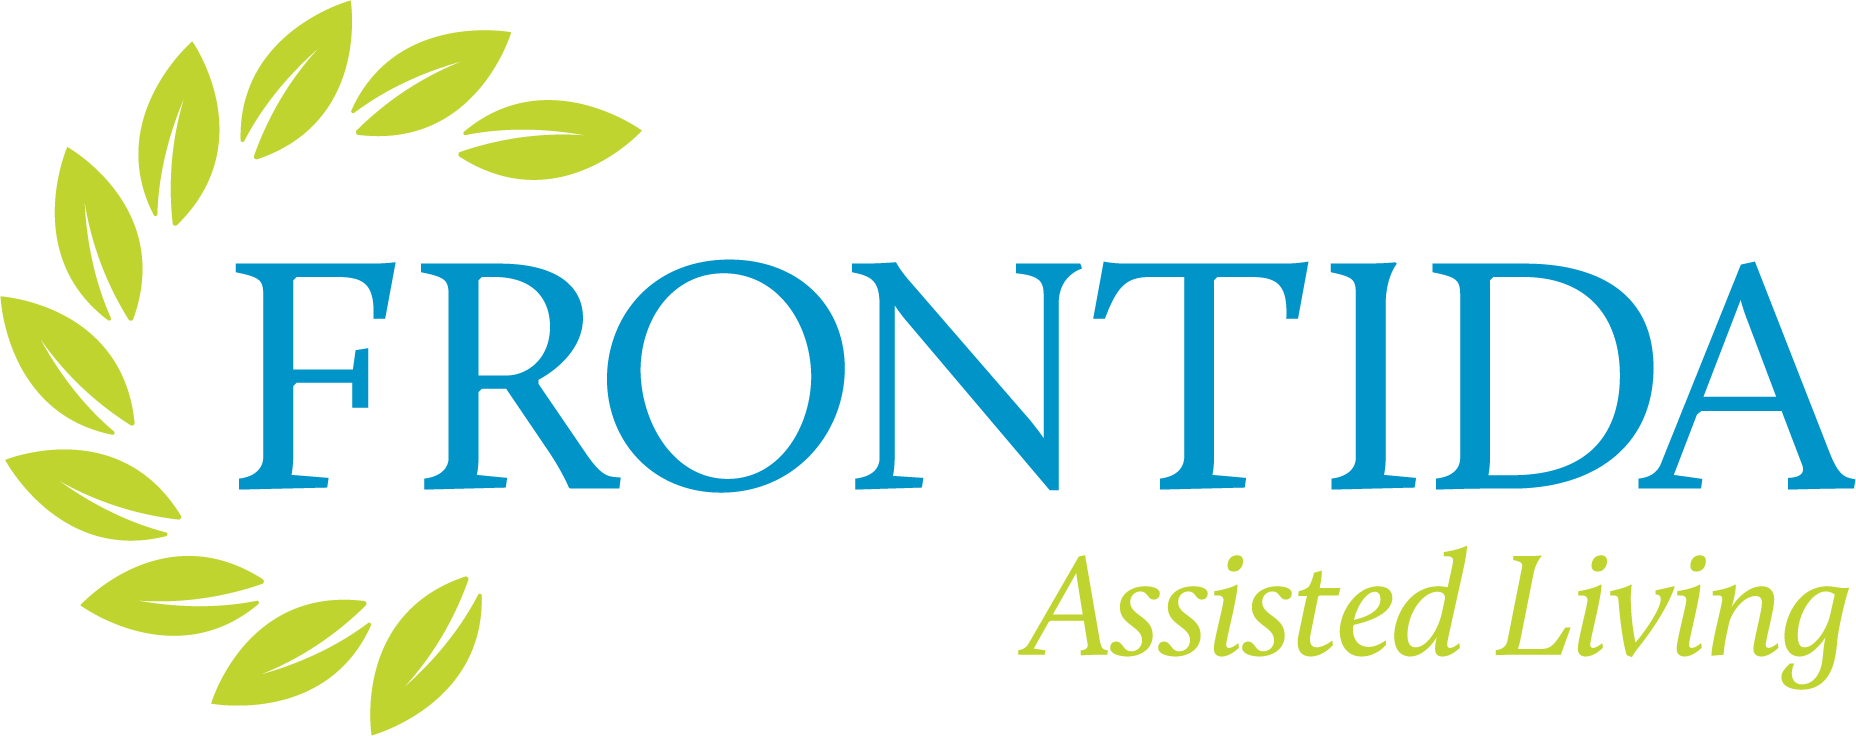 Frontida Assisted Living Company Logo